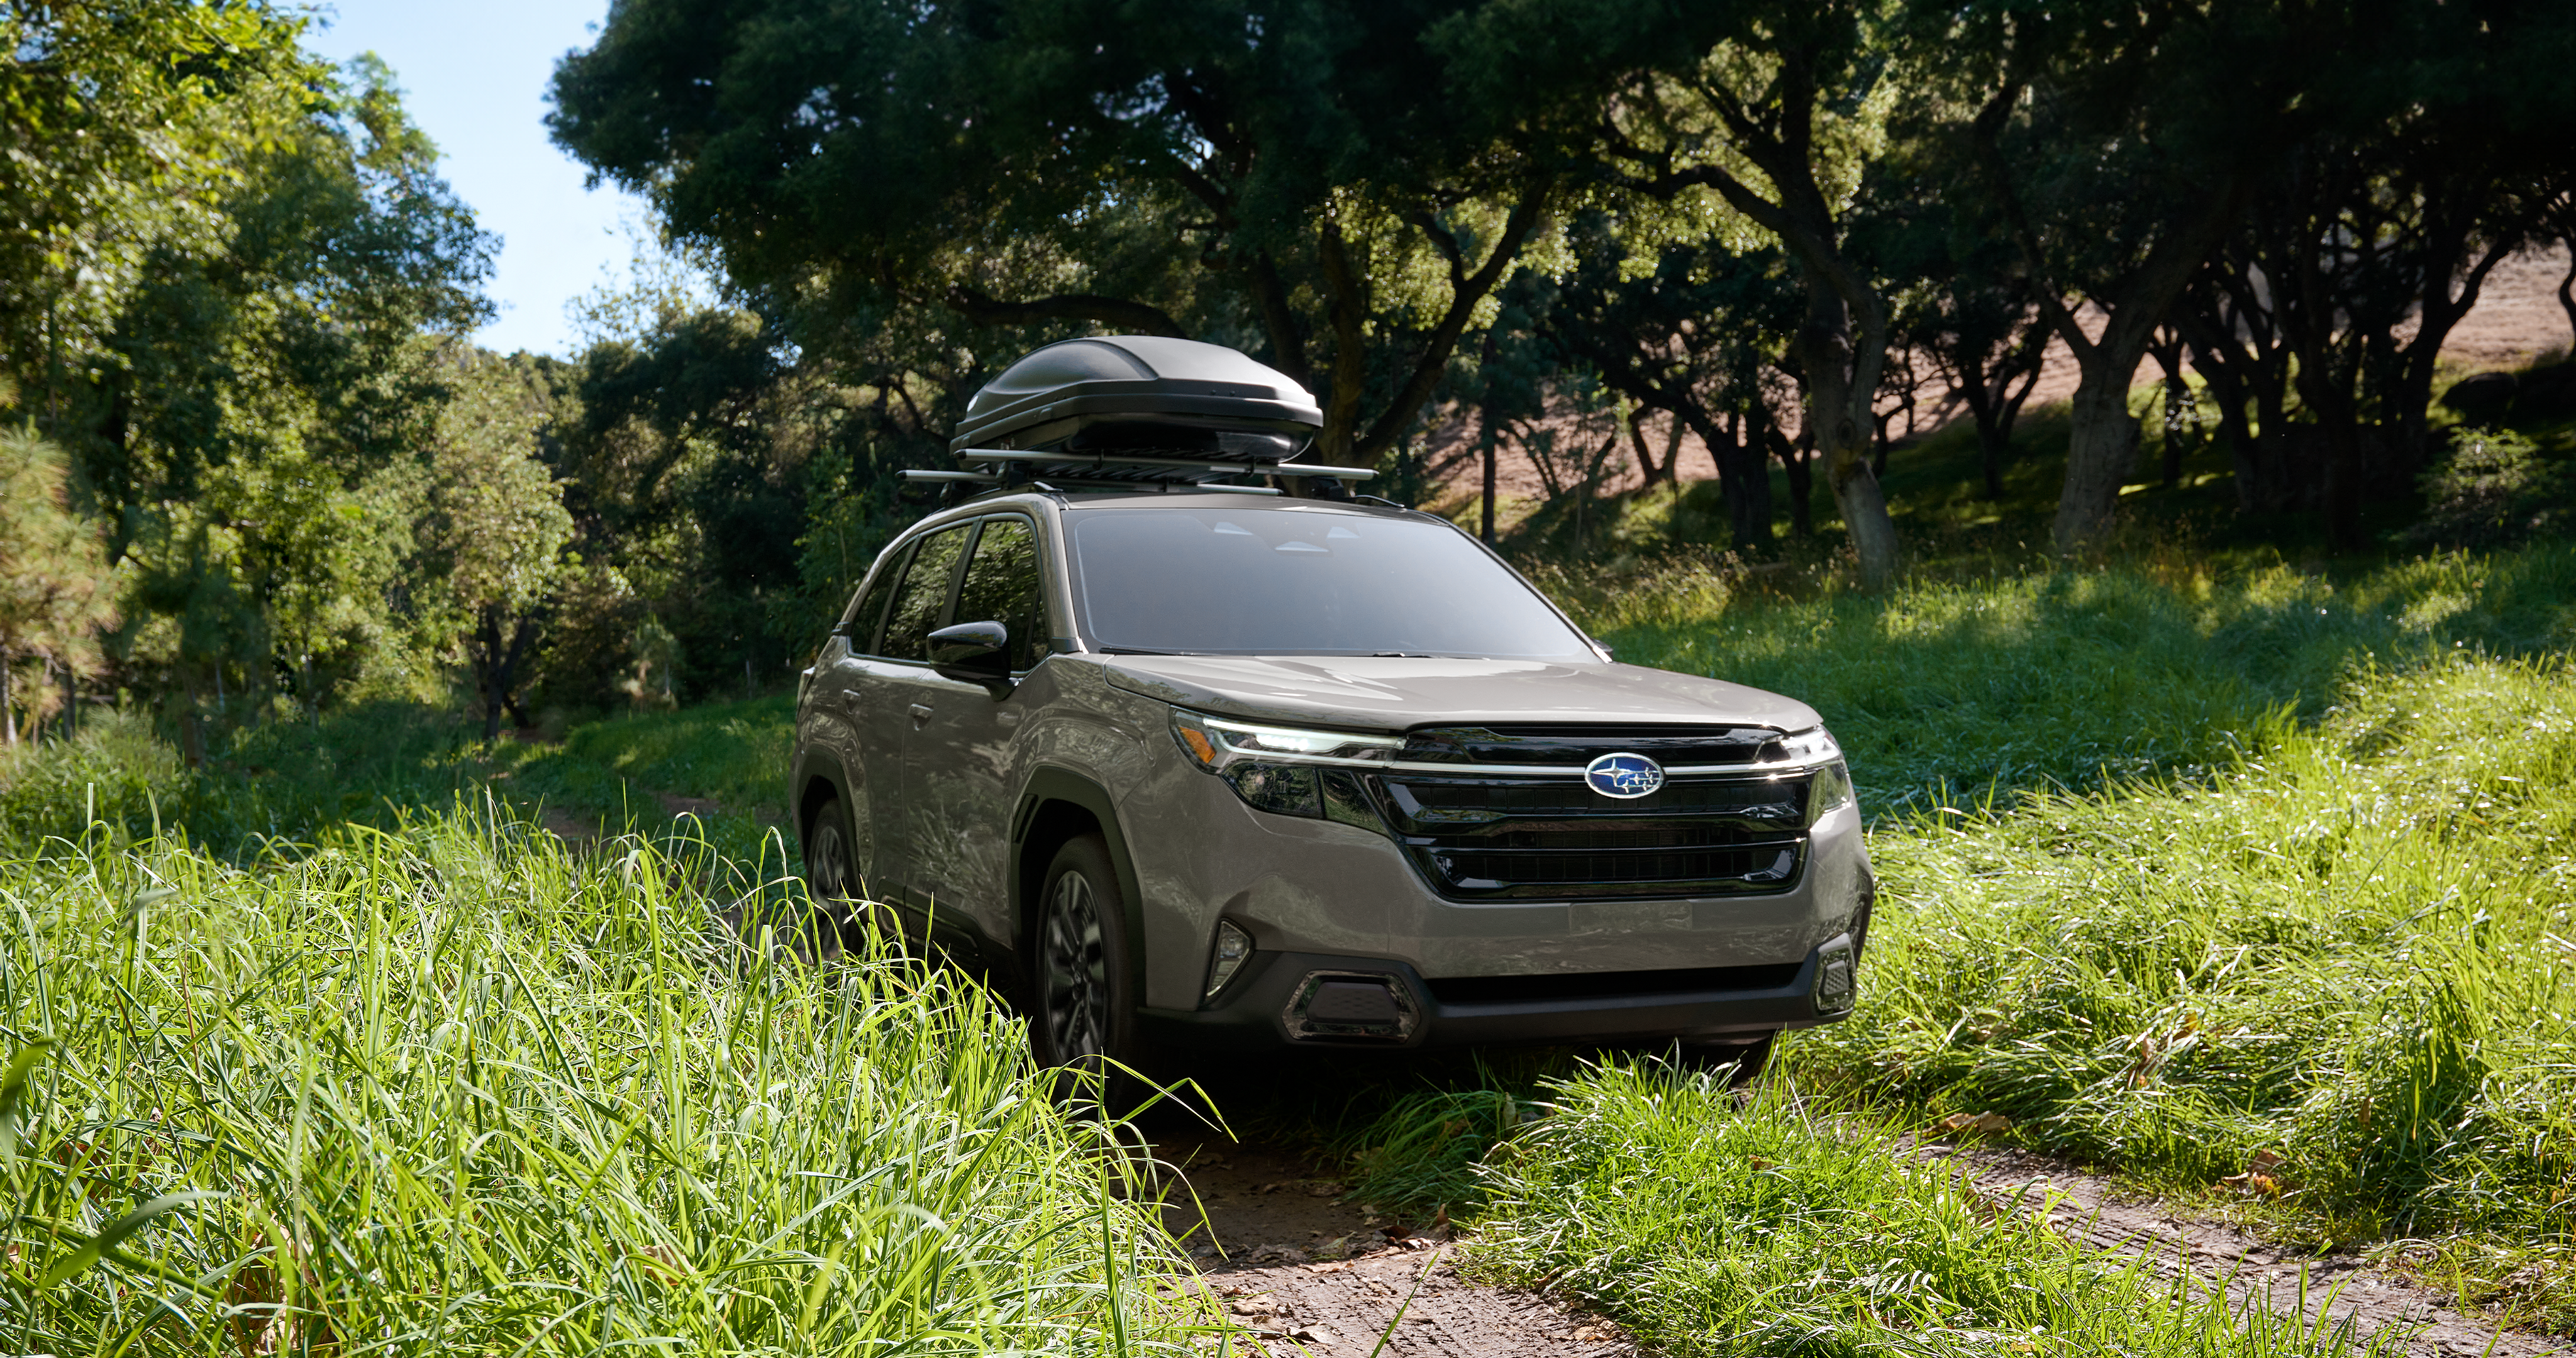  A Subaru Forester AWD SUV with a cargo carrier on its roof drives on a path through high grass.